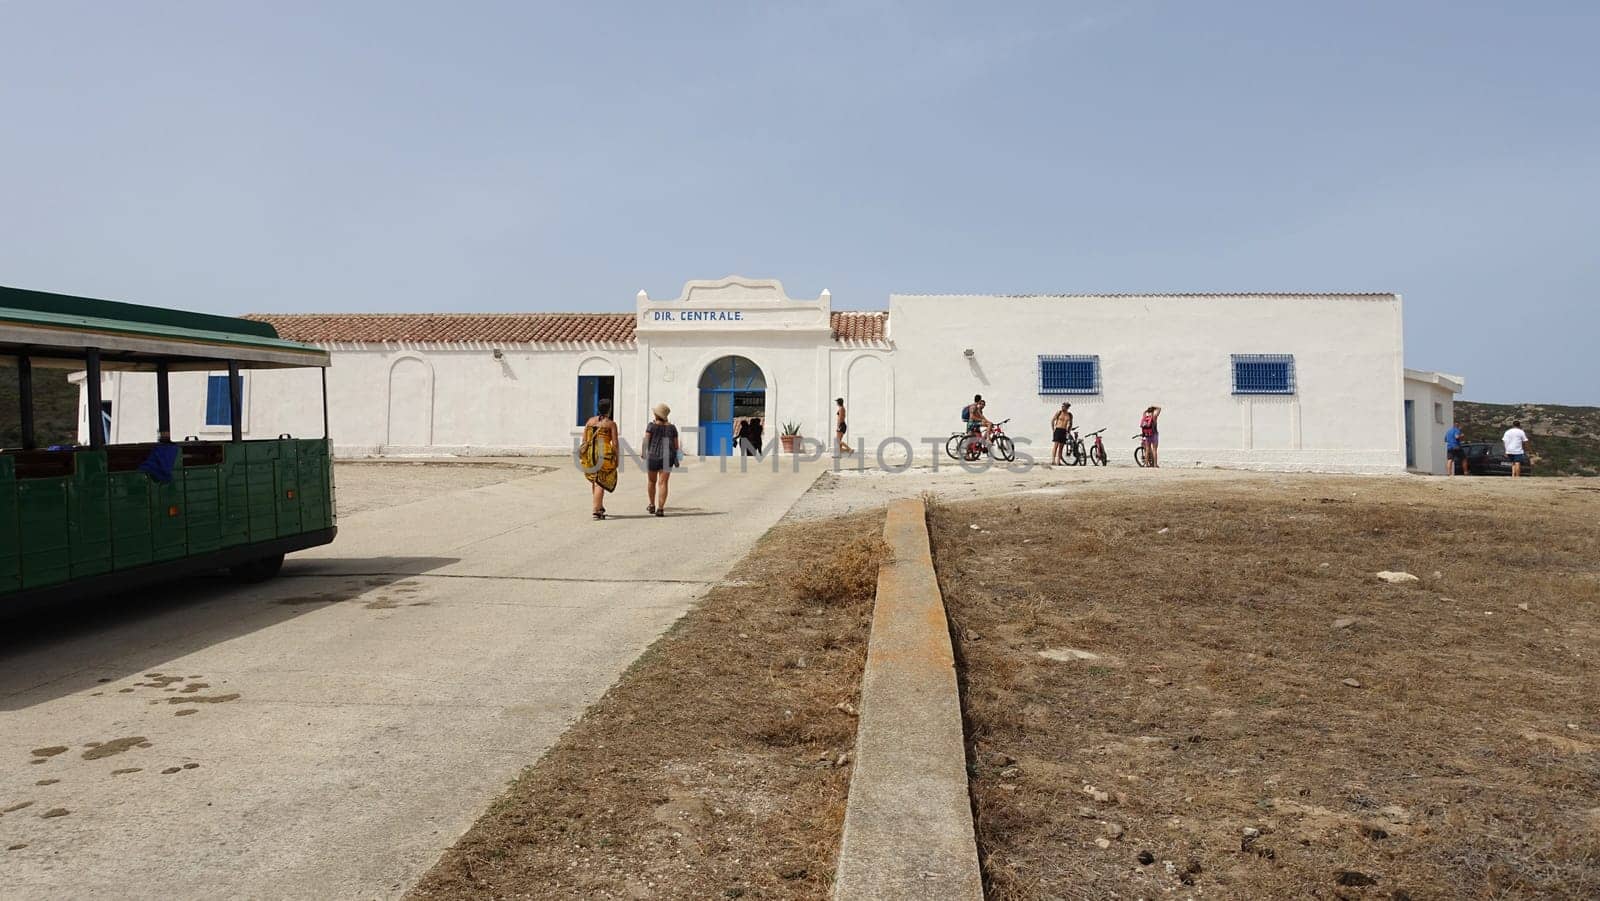 Asinara, Italy, August 11 2021. The entrance of the old prison on the island during a summer morning.